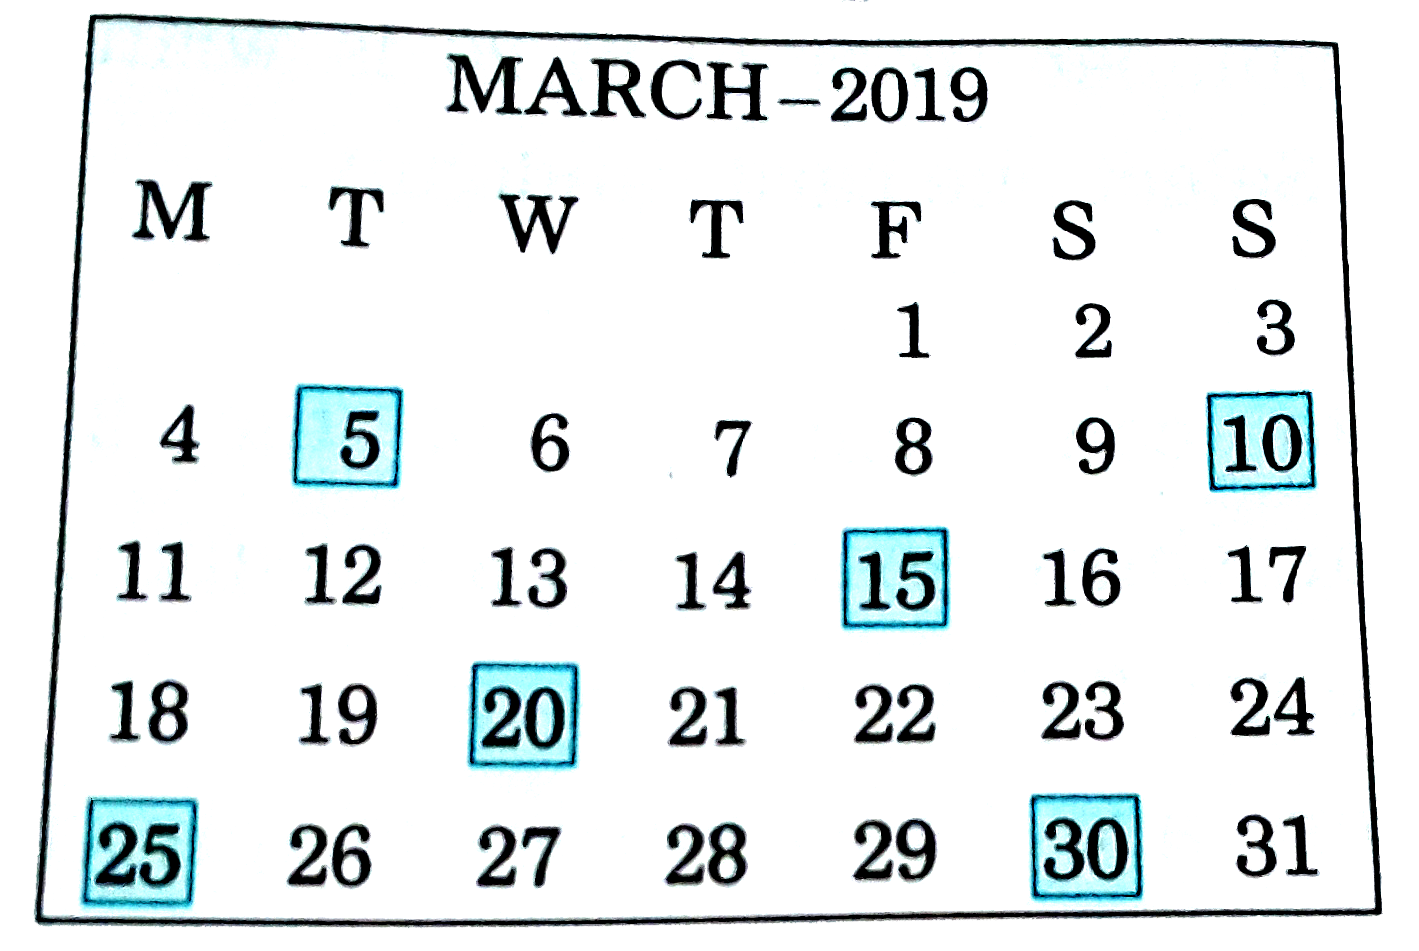 In the month of March 2019, find the days on which the date is a multiple of 5.